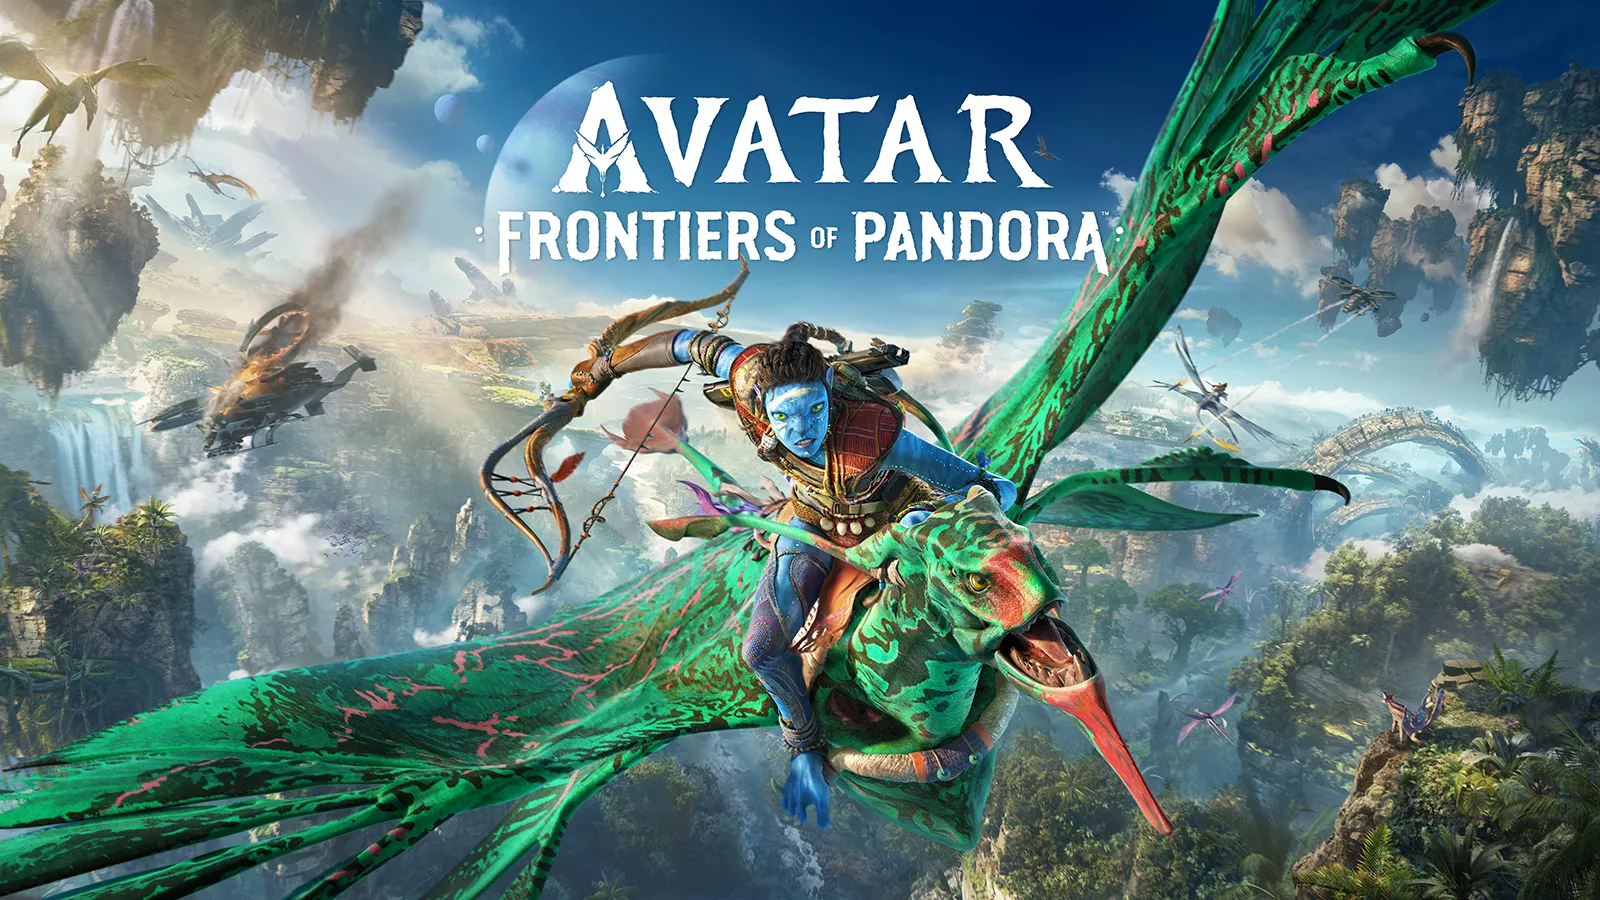 Avatar: Frontiers of Pandora Unleashes Mesmerizing Power in Gaming Glory